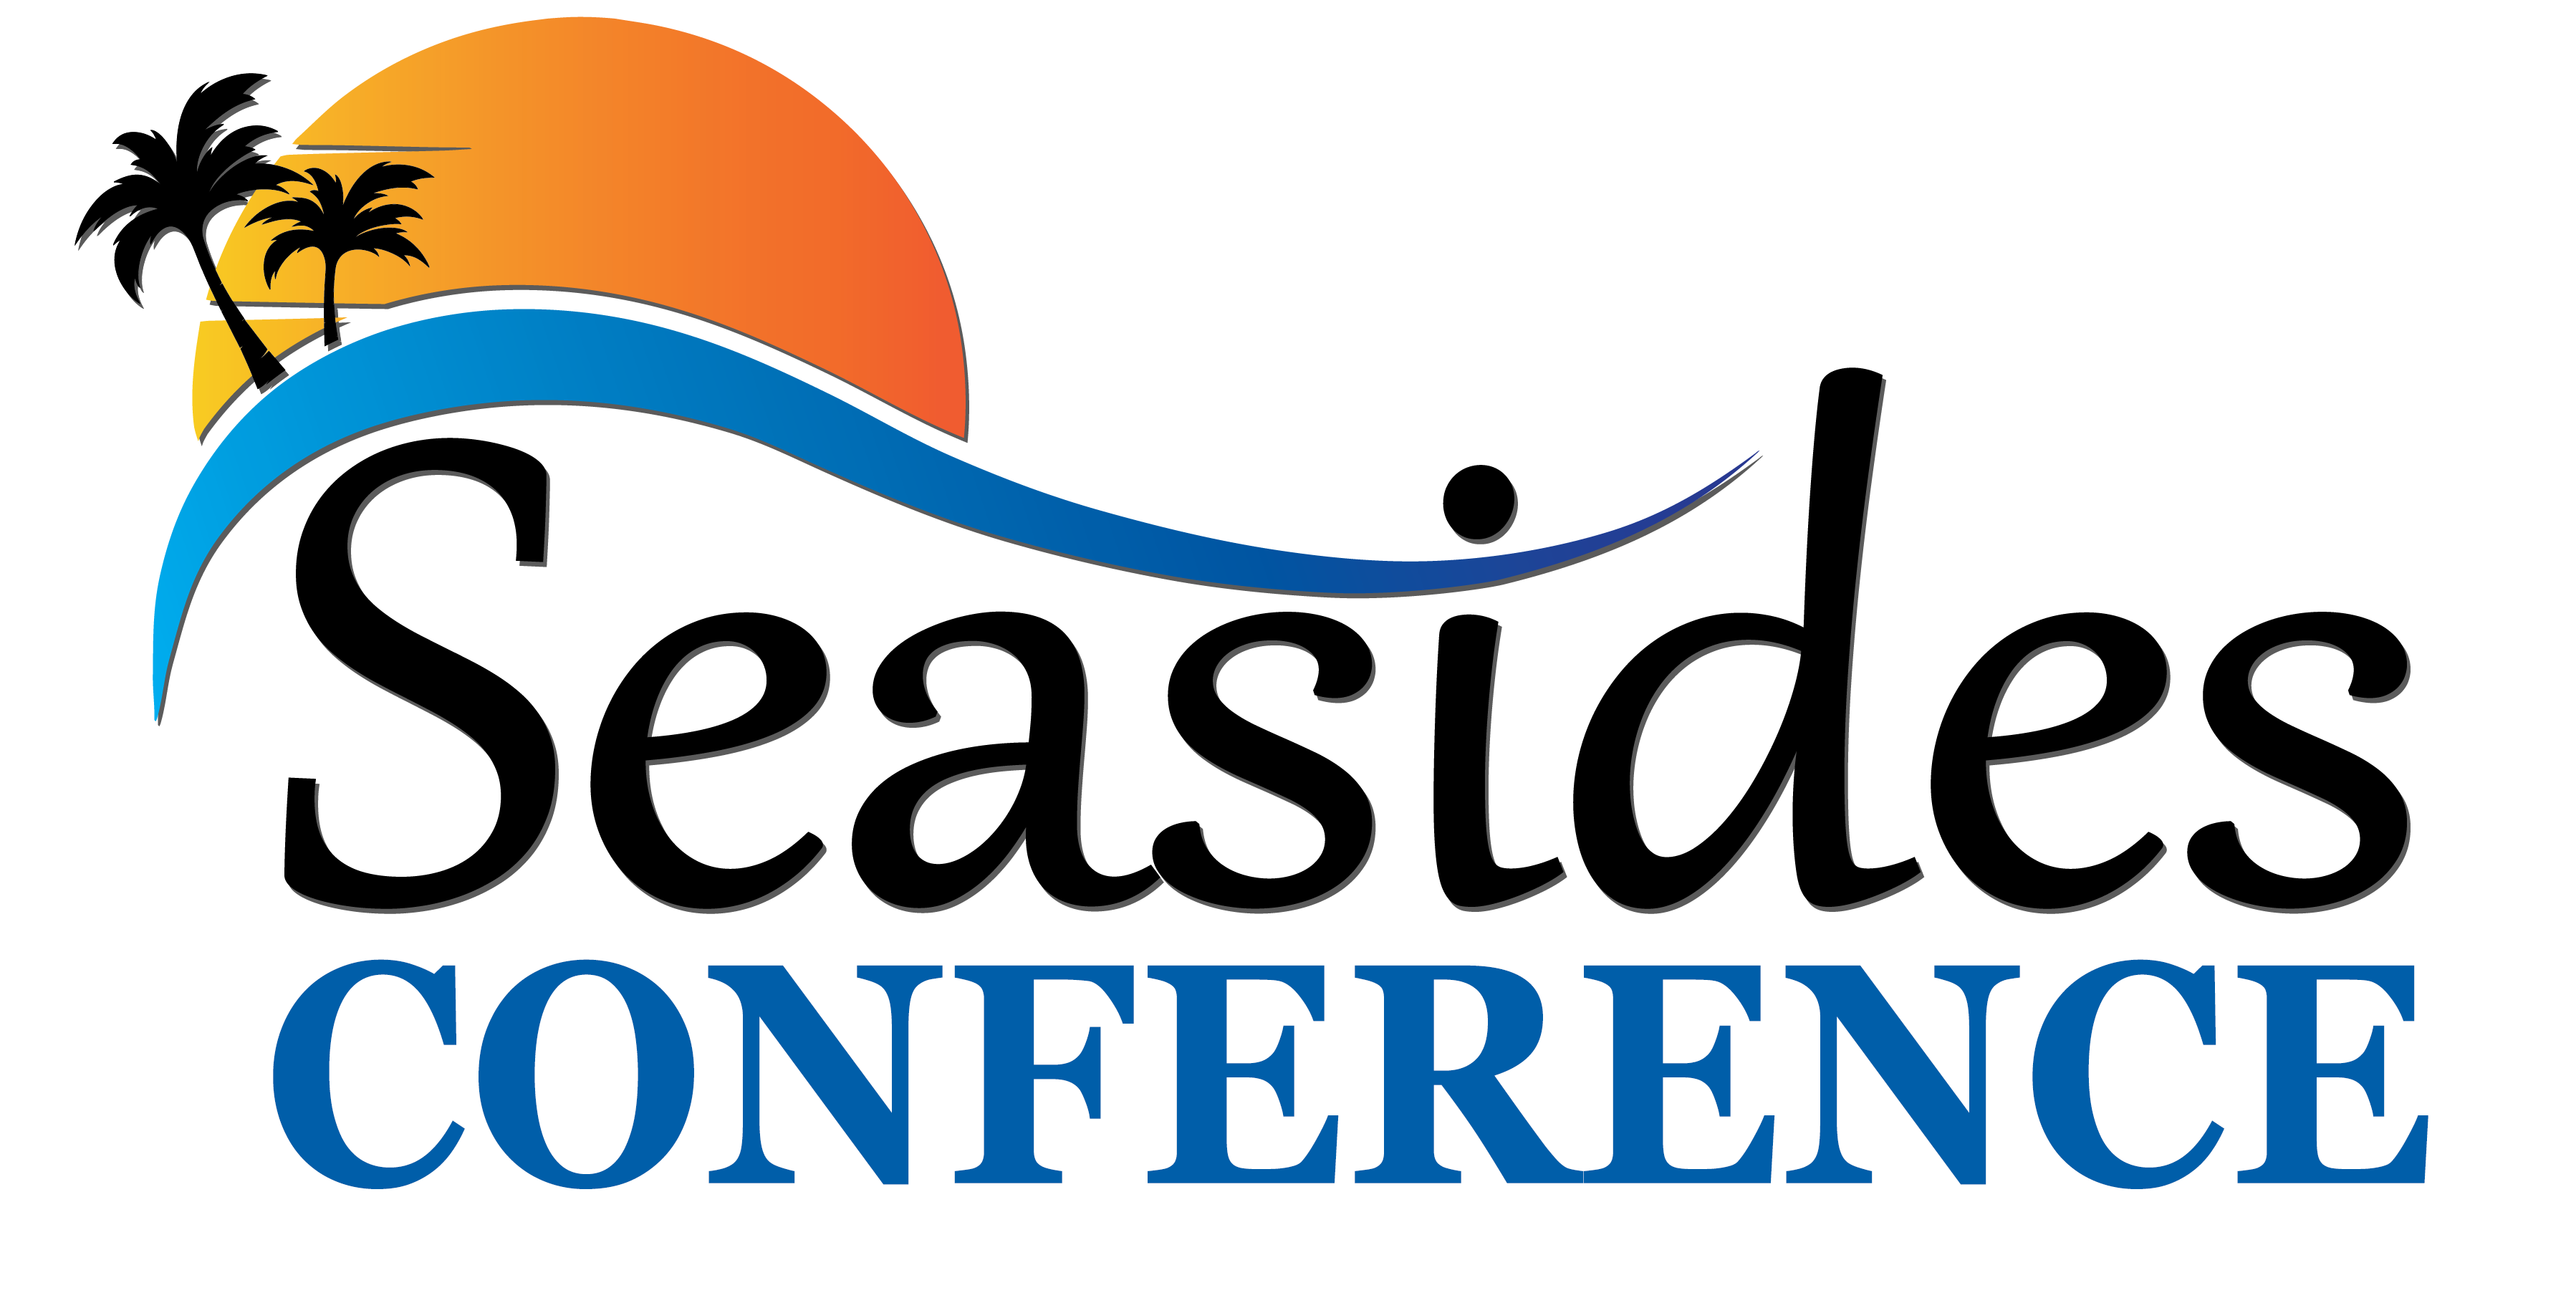 Seasides conference